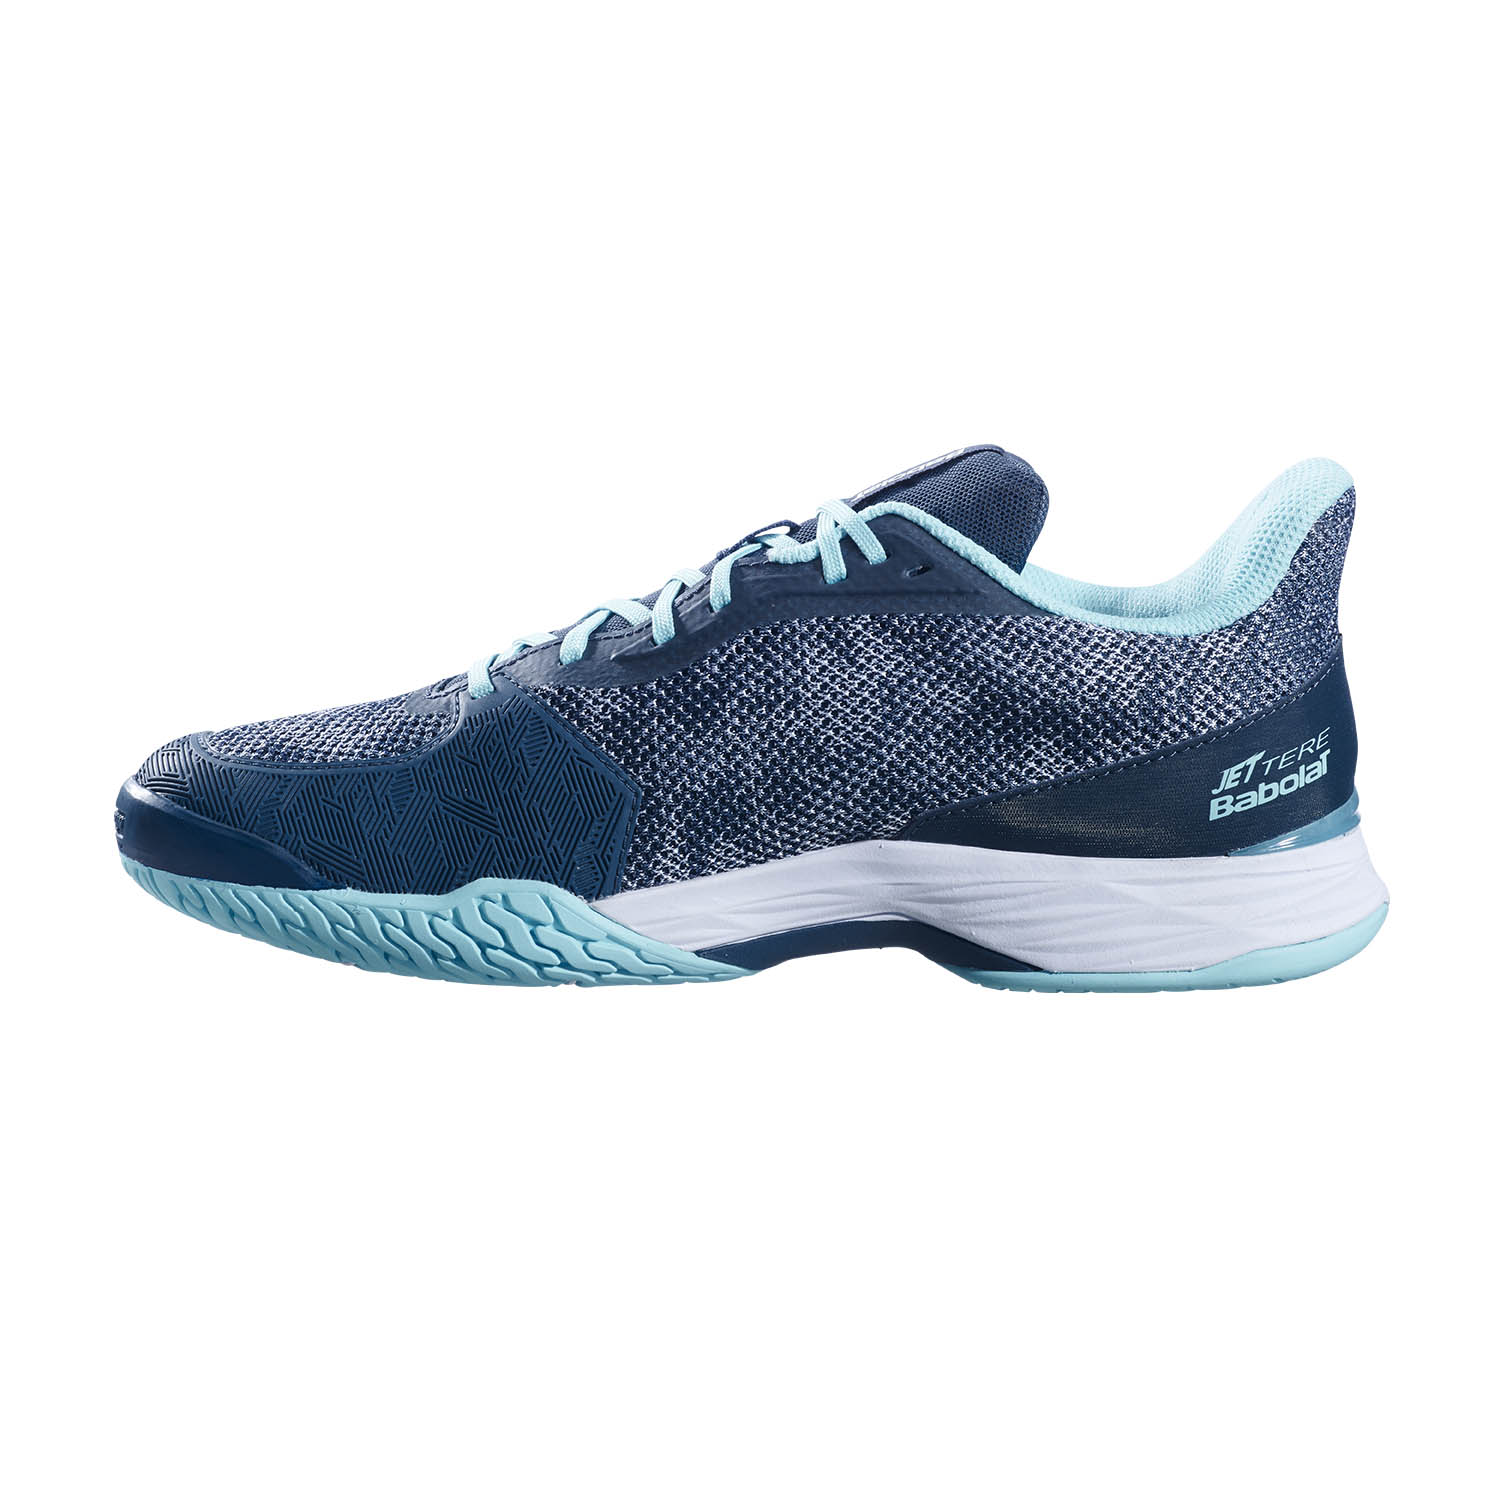 Babolat Jet Tere All Court - Midnight Navy